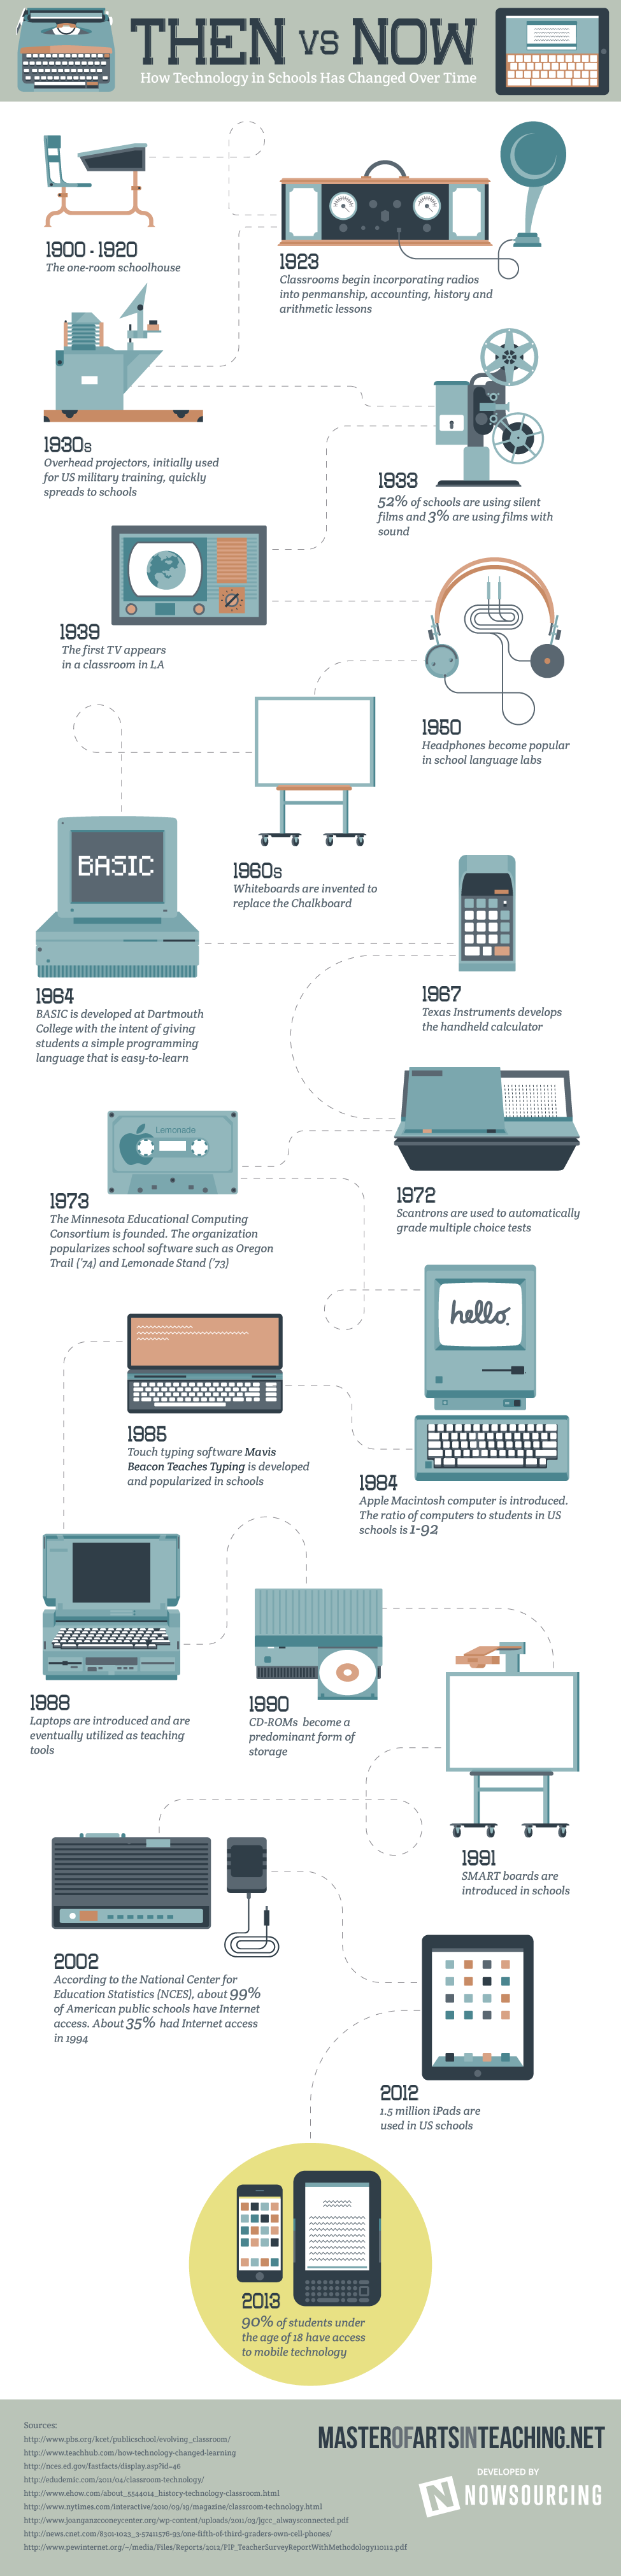 Then vs Now: How Technology in Schools Has Changed Over Time